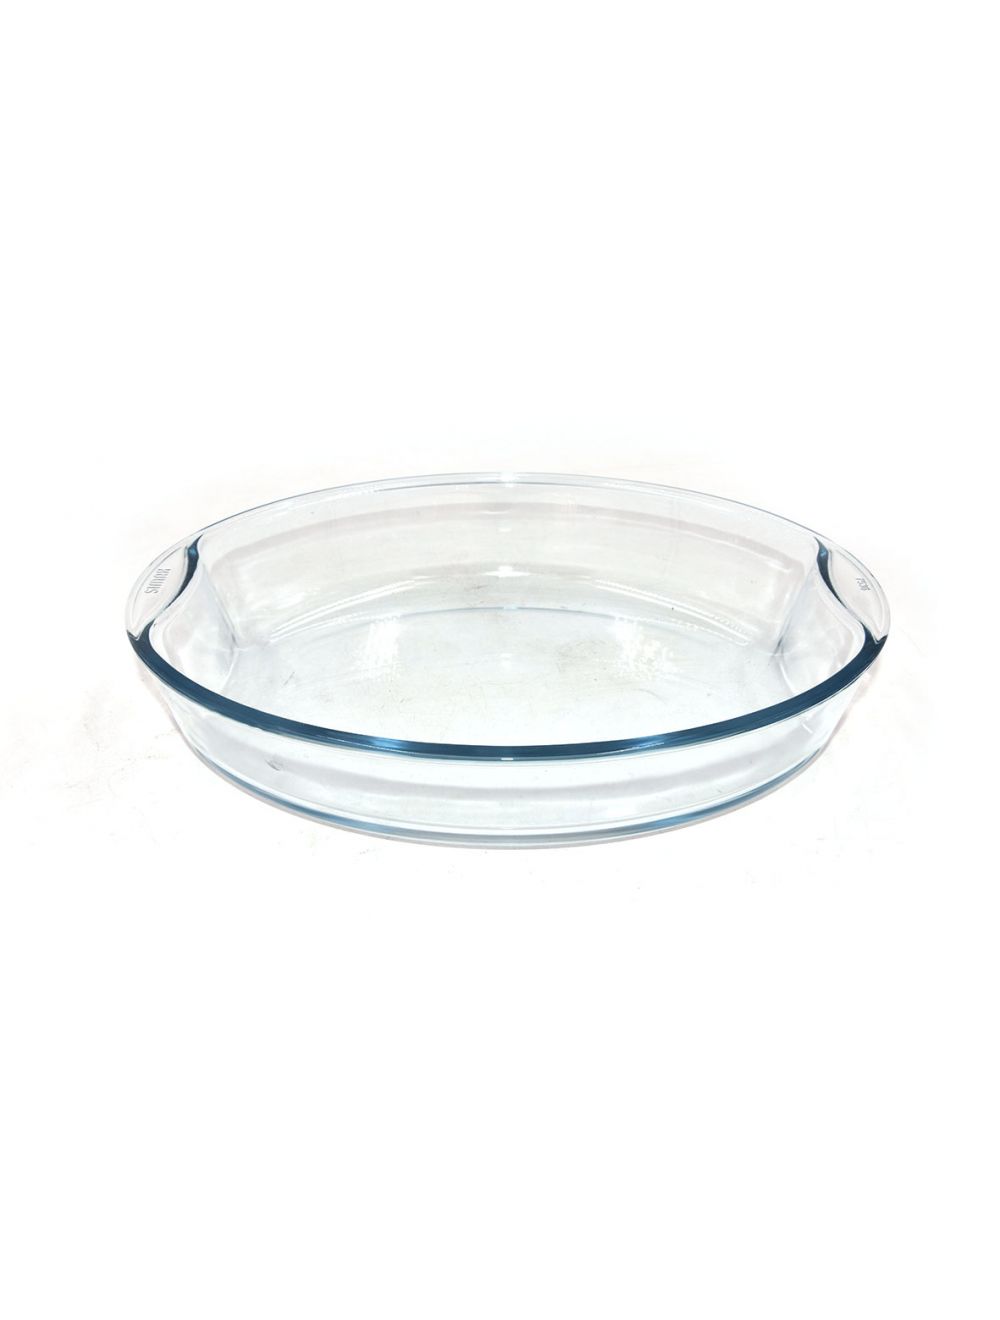 Oval Baking Dish 2.5 Litre